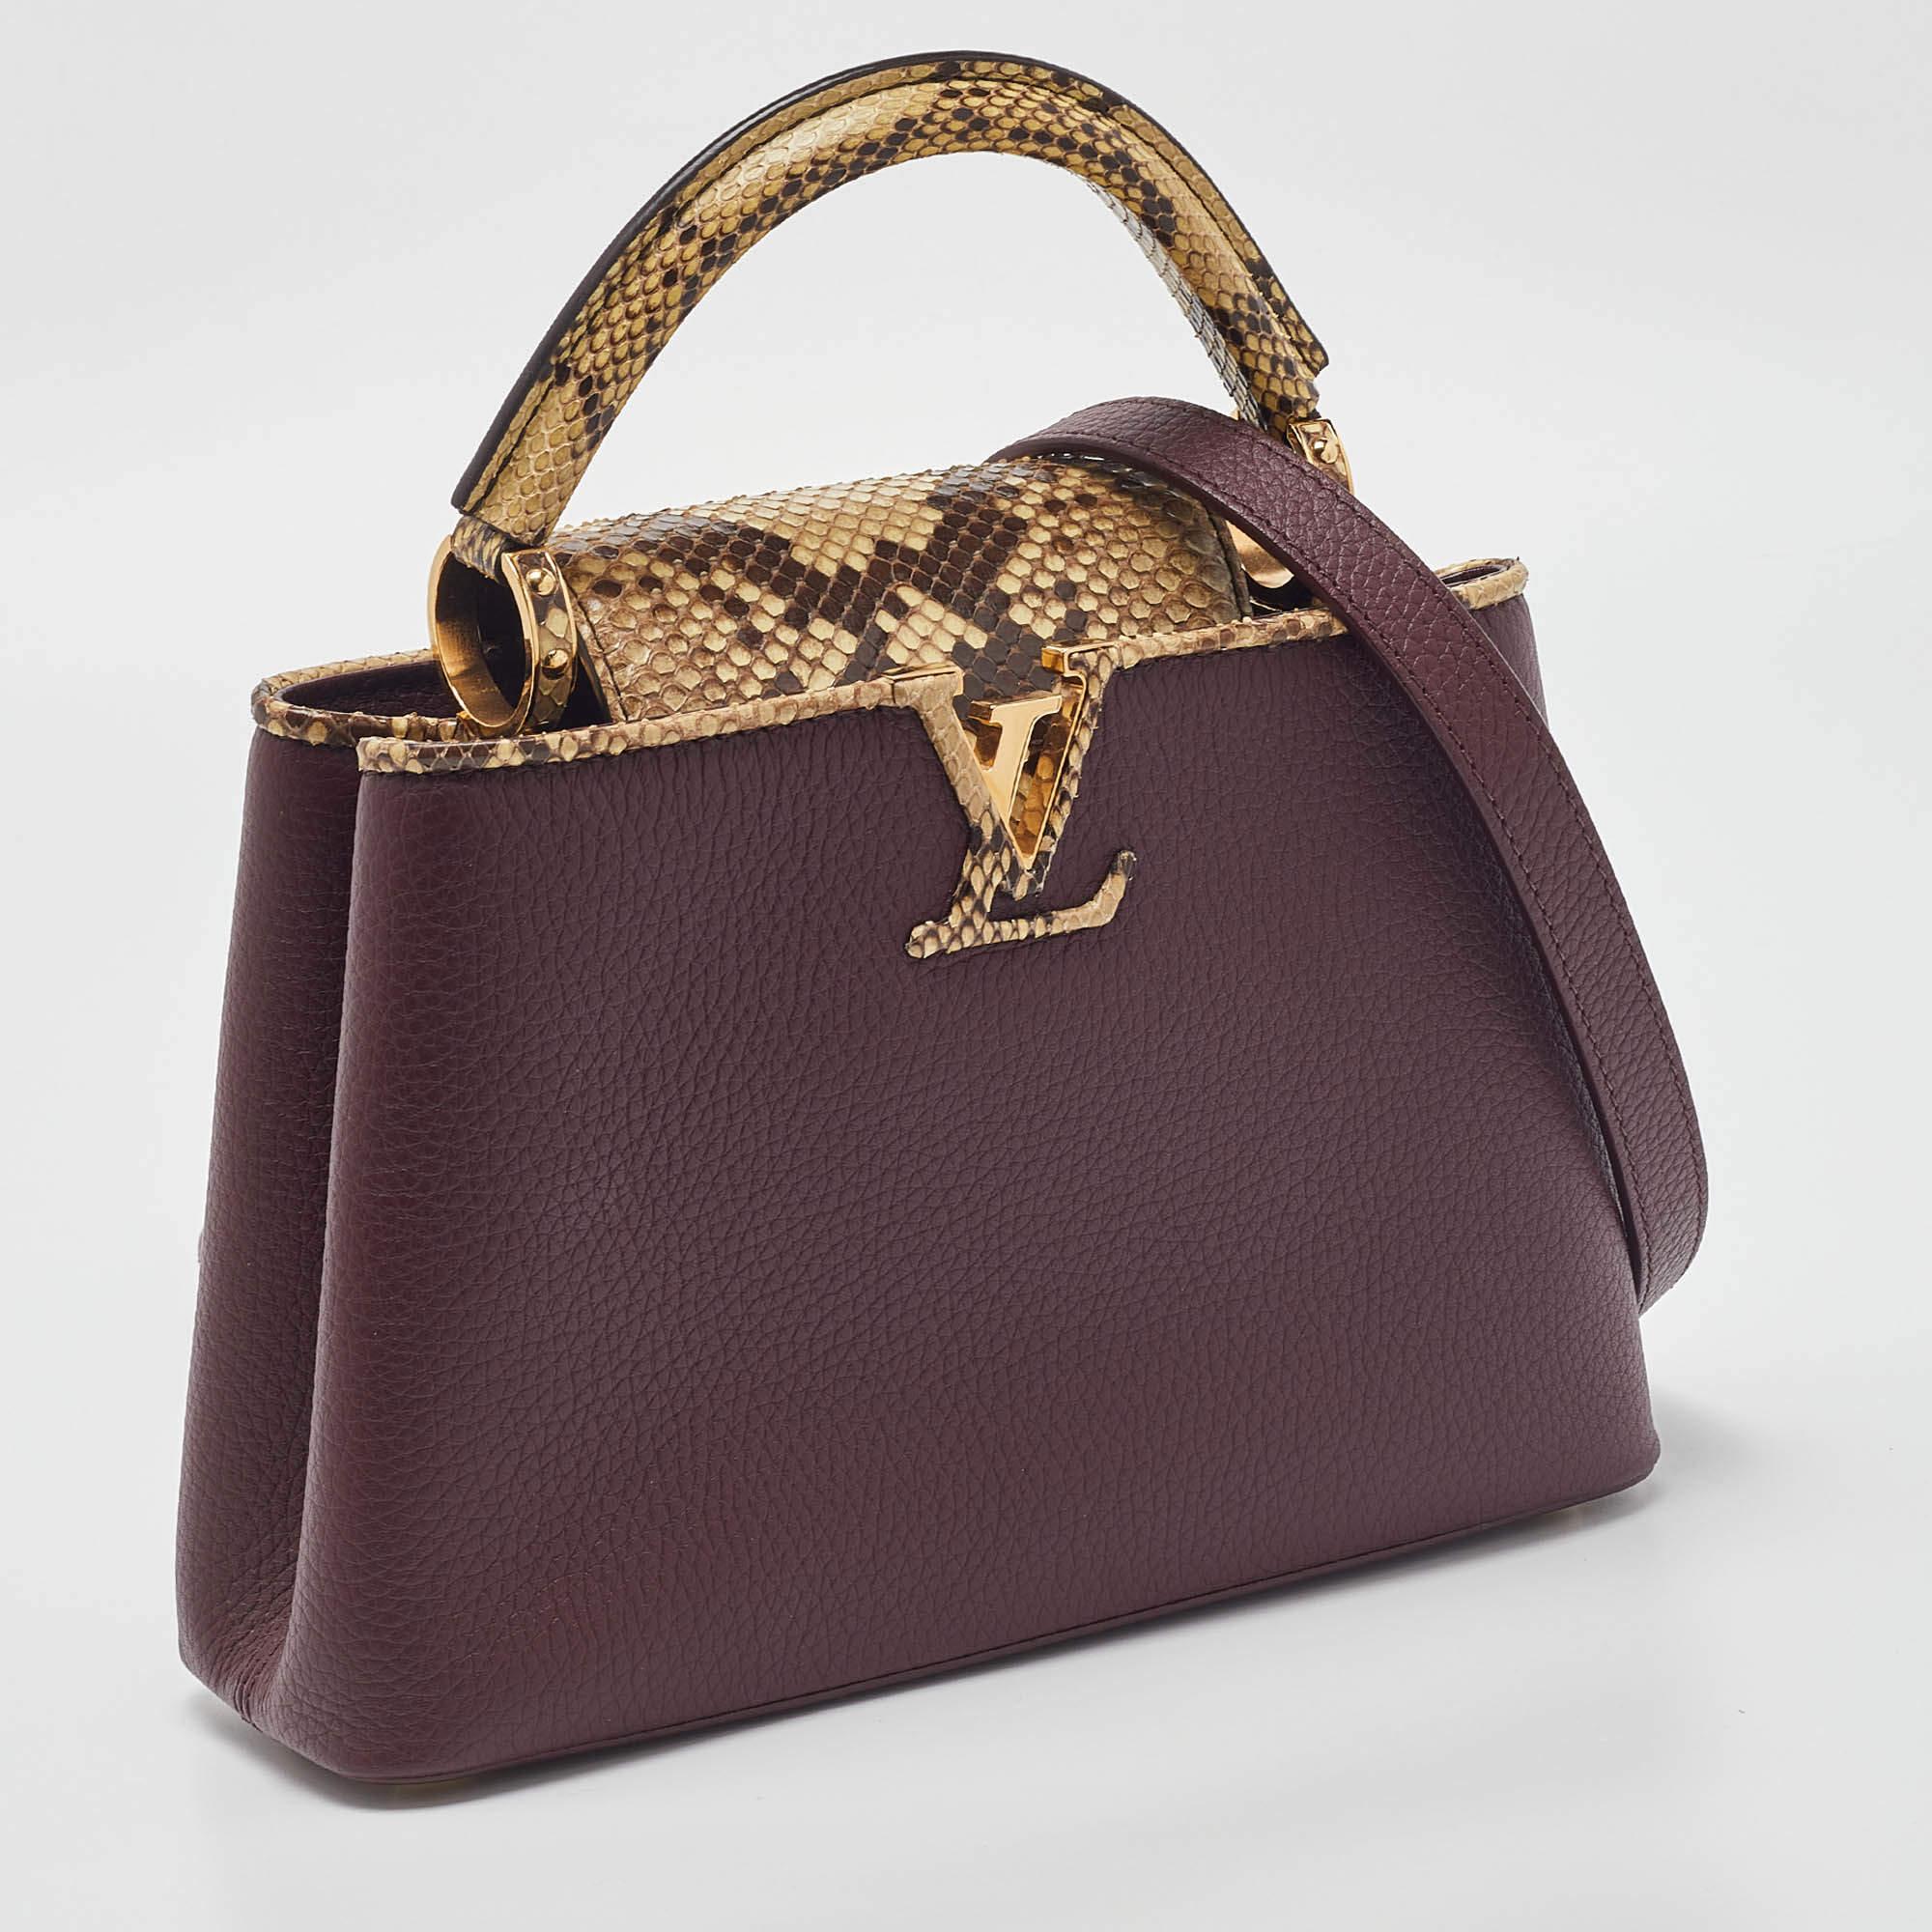 Crafted from leather, this LV Capucines BB features a structured design with a single python handle and protective metal feet. While the front LV elevates its beauty, the leather interior will dutifully hold all your daily essentials.

